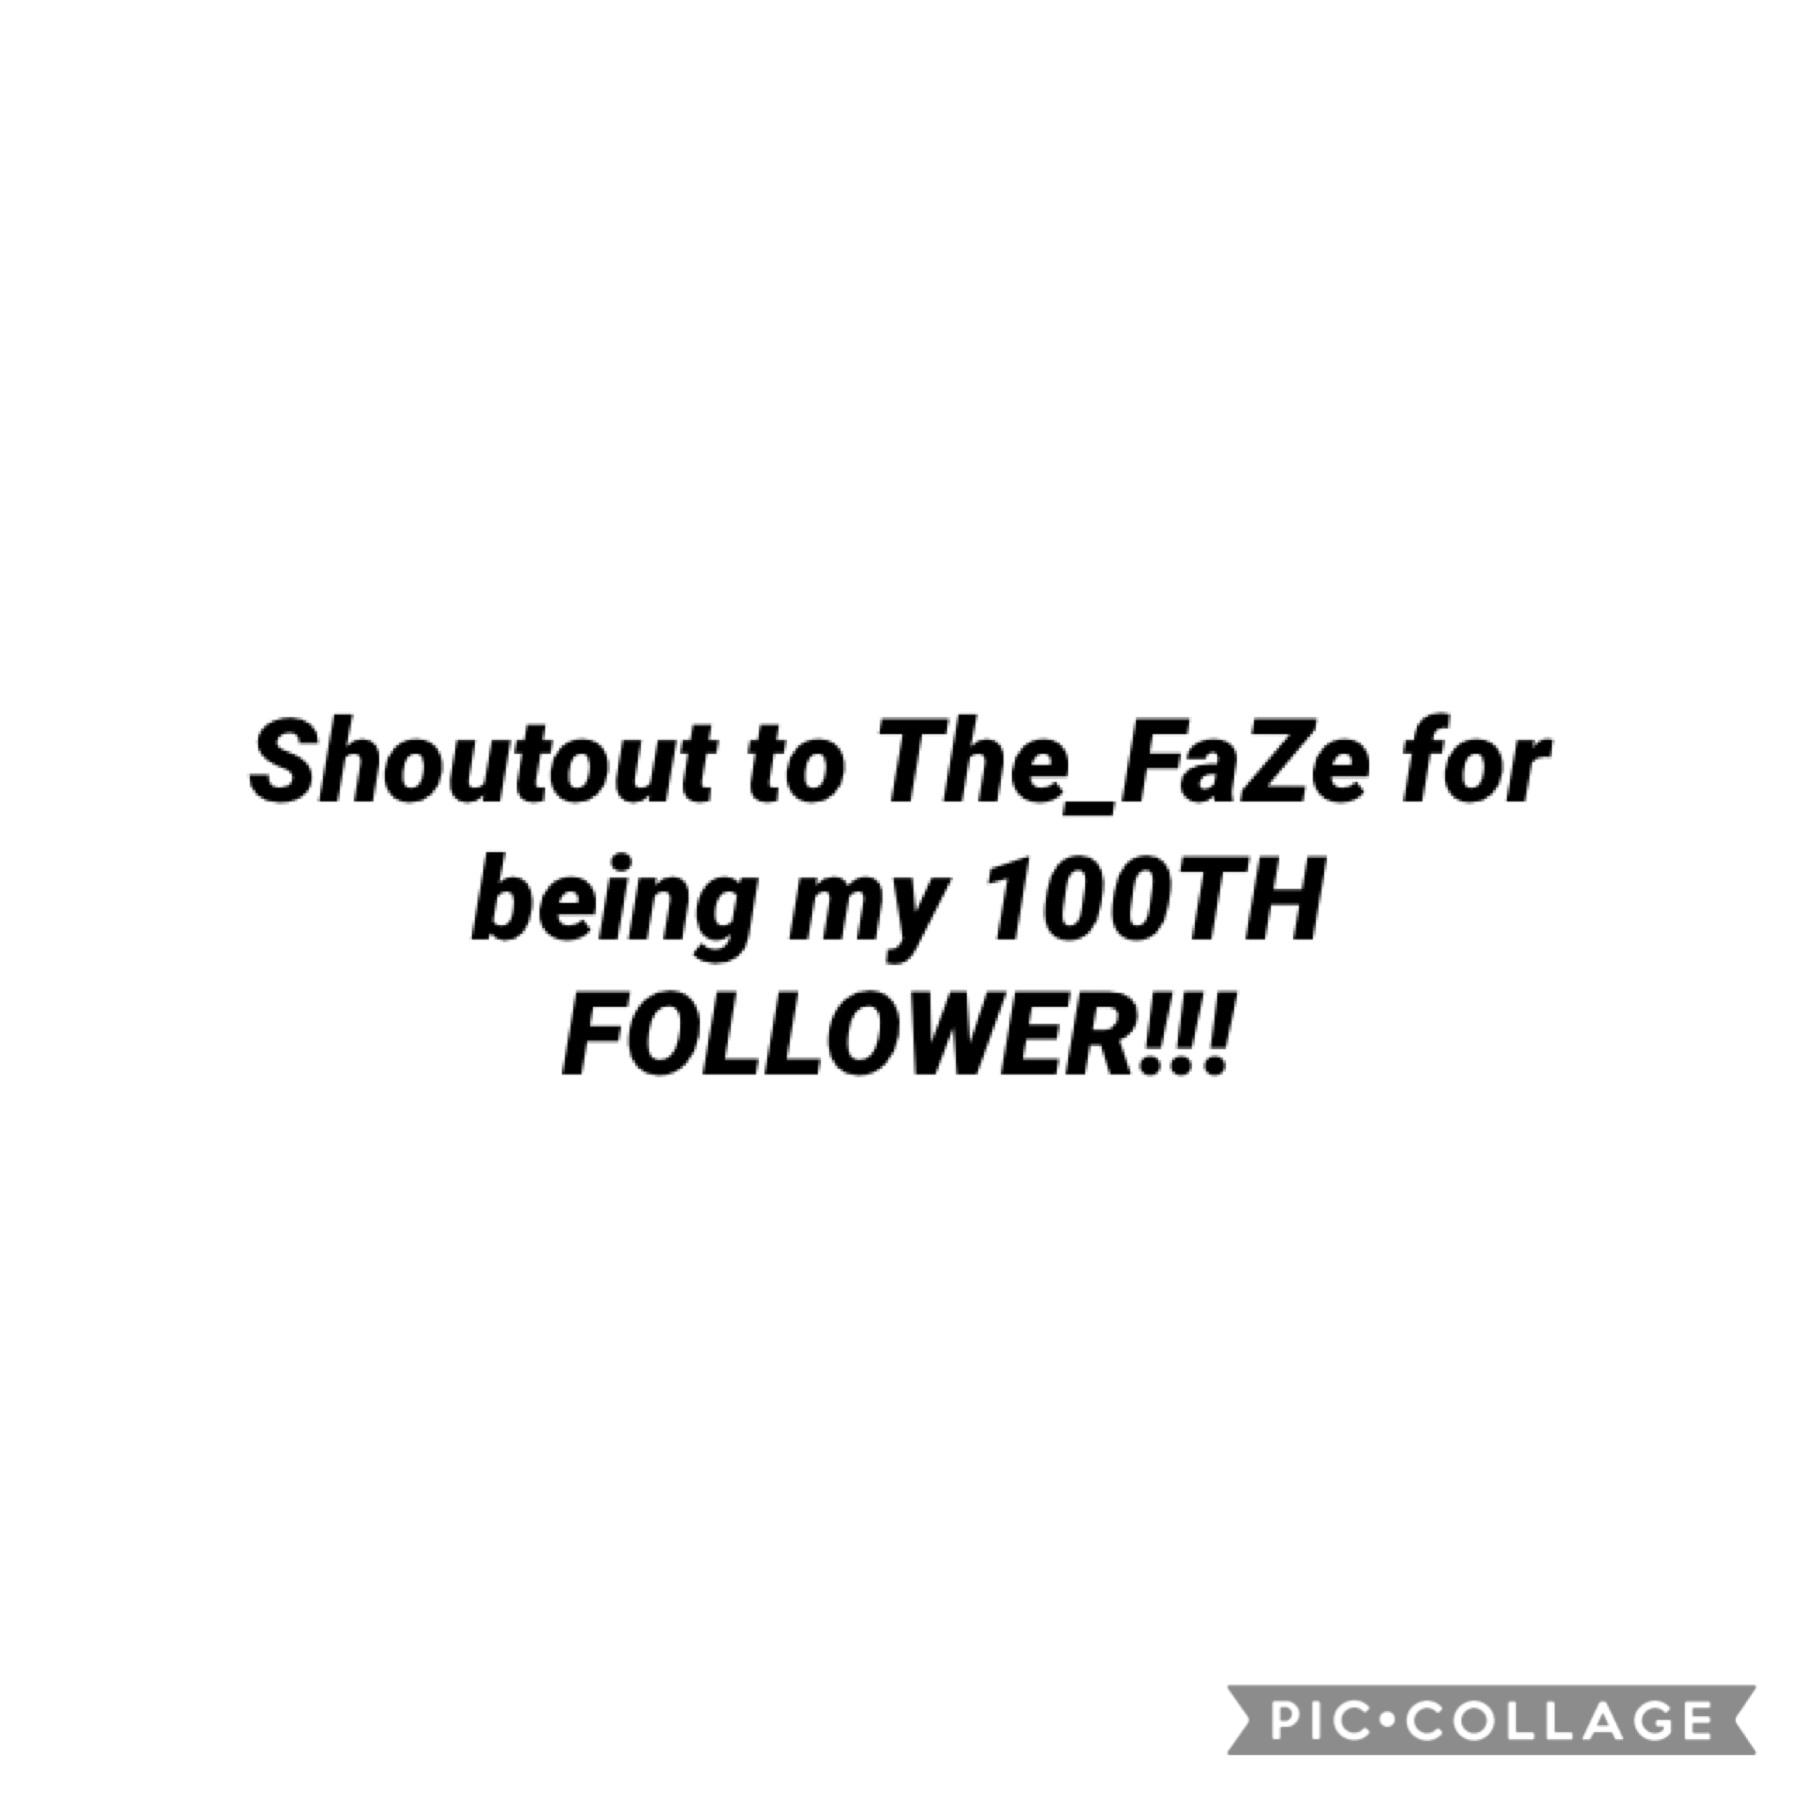 Thanks so much for 100 